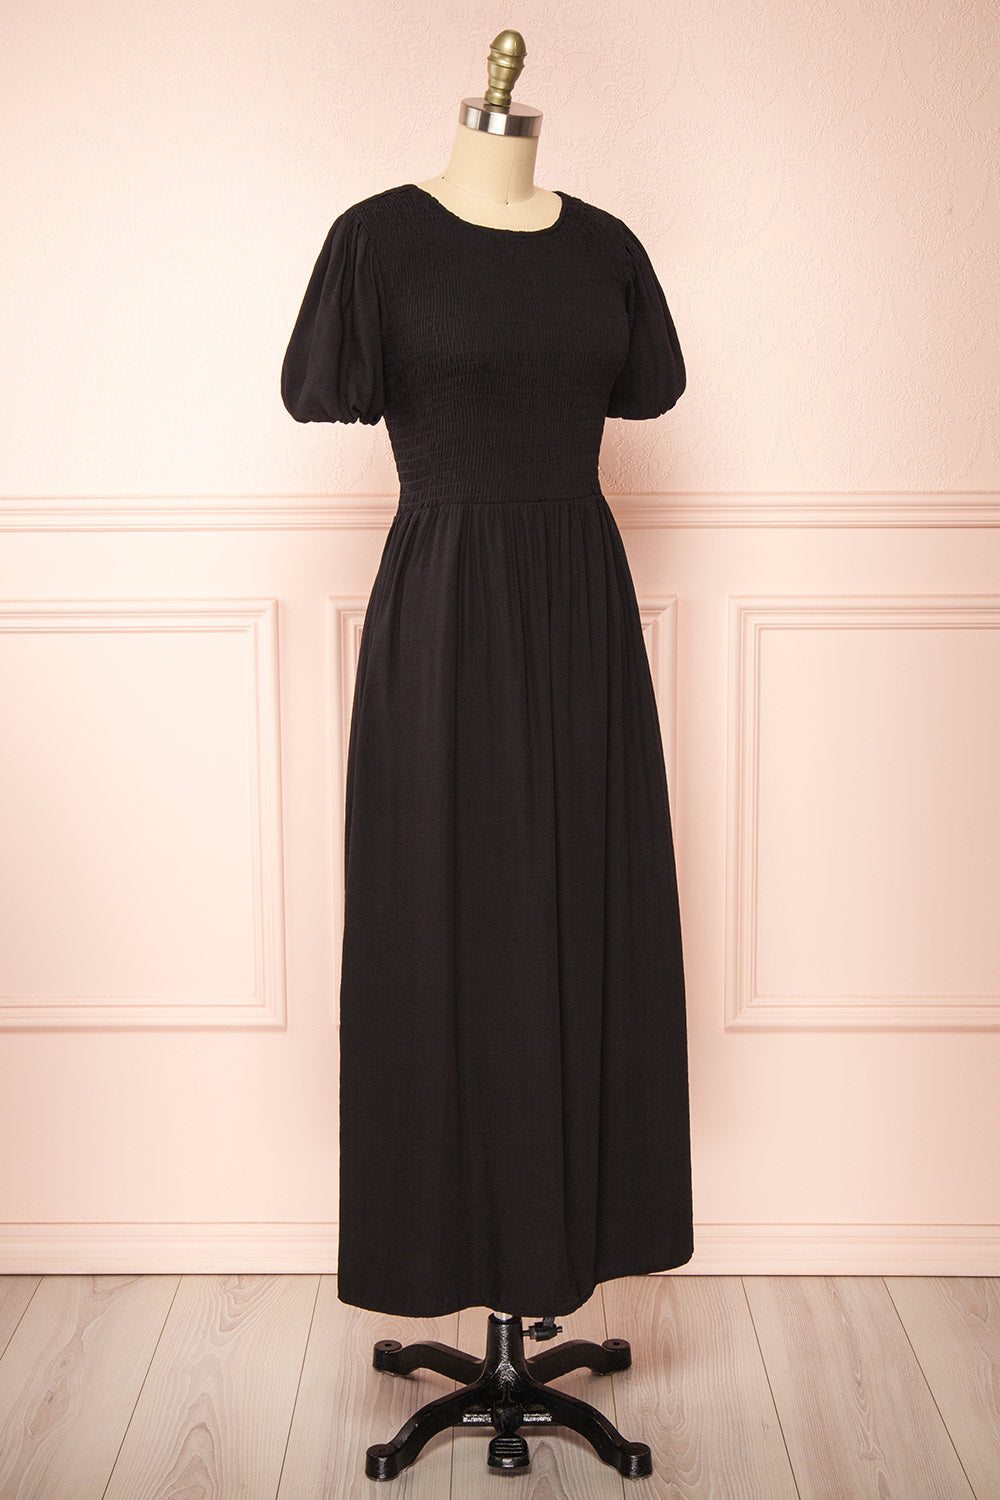 Lilou Black Open-back Midi Dress w/ Puffy Sleeves | Boutique 1861 side view